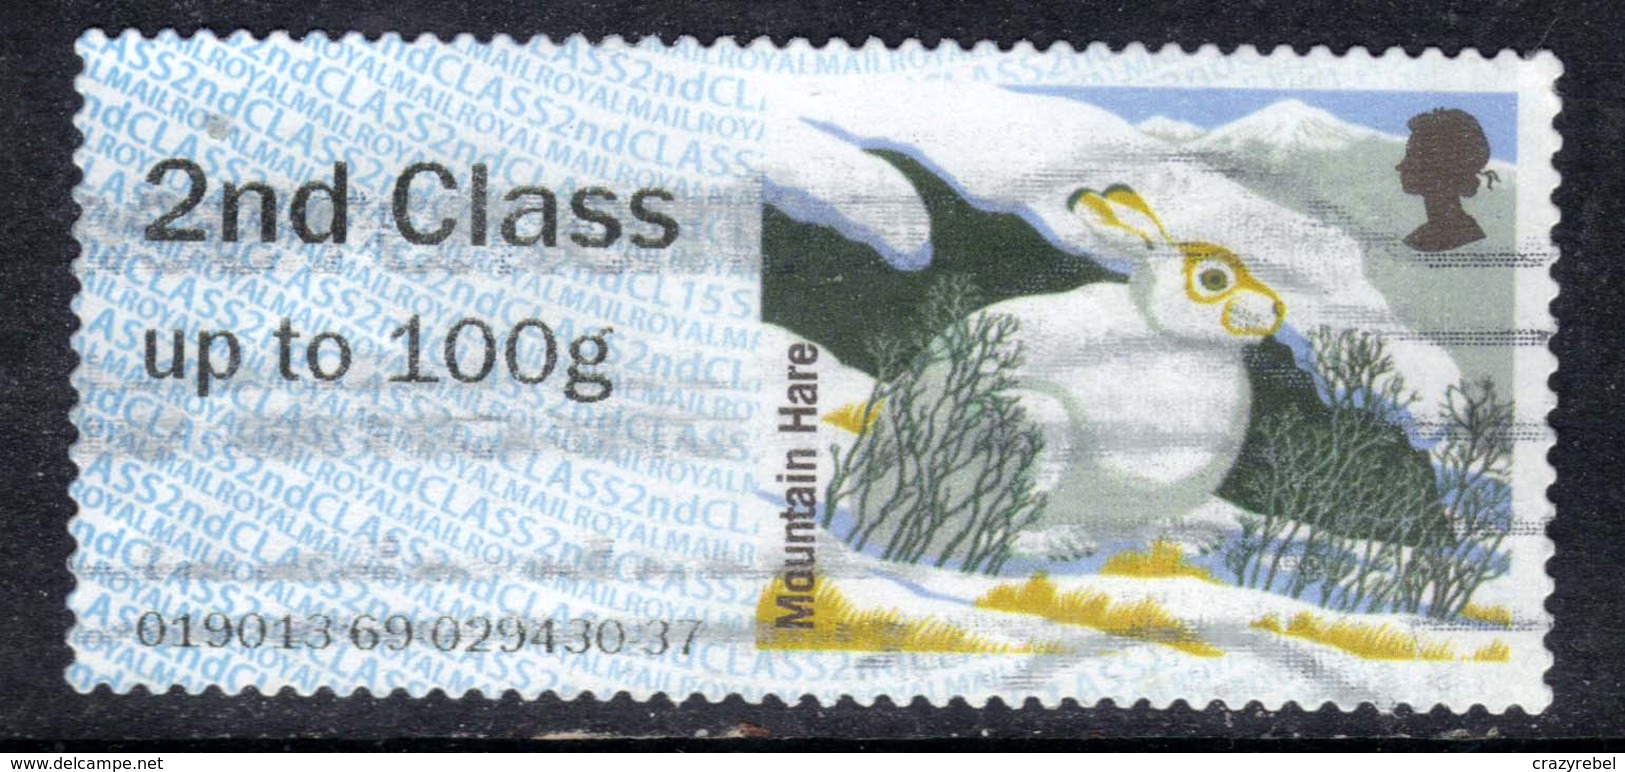 GB 2015 QE2 2nd Class Up To 100 Gms Post & Go Mountain Hare (1157 ) - Post & Go (automaten)